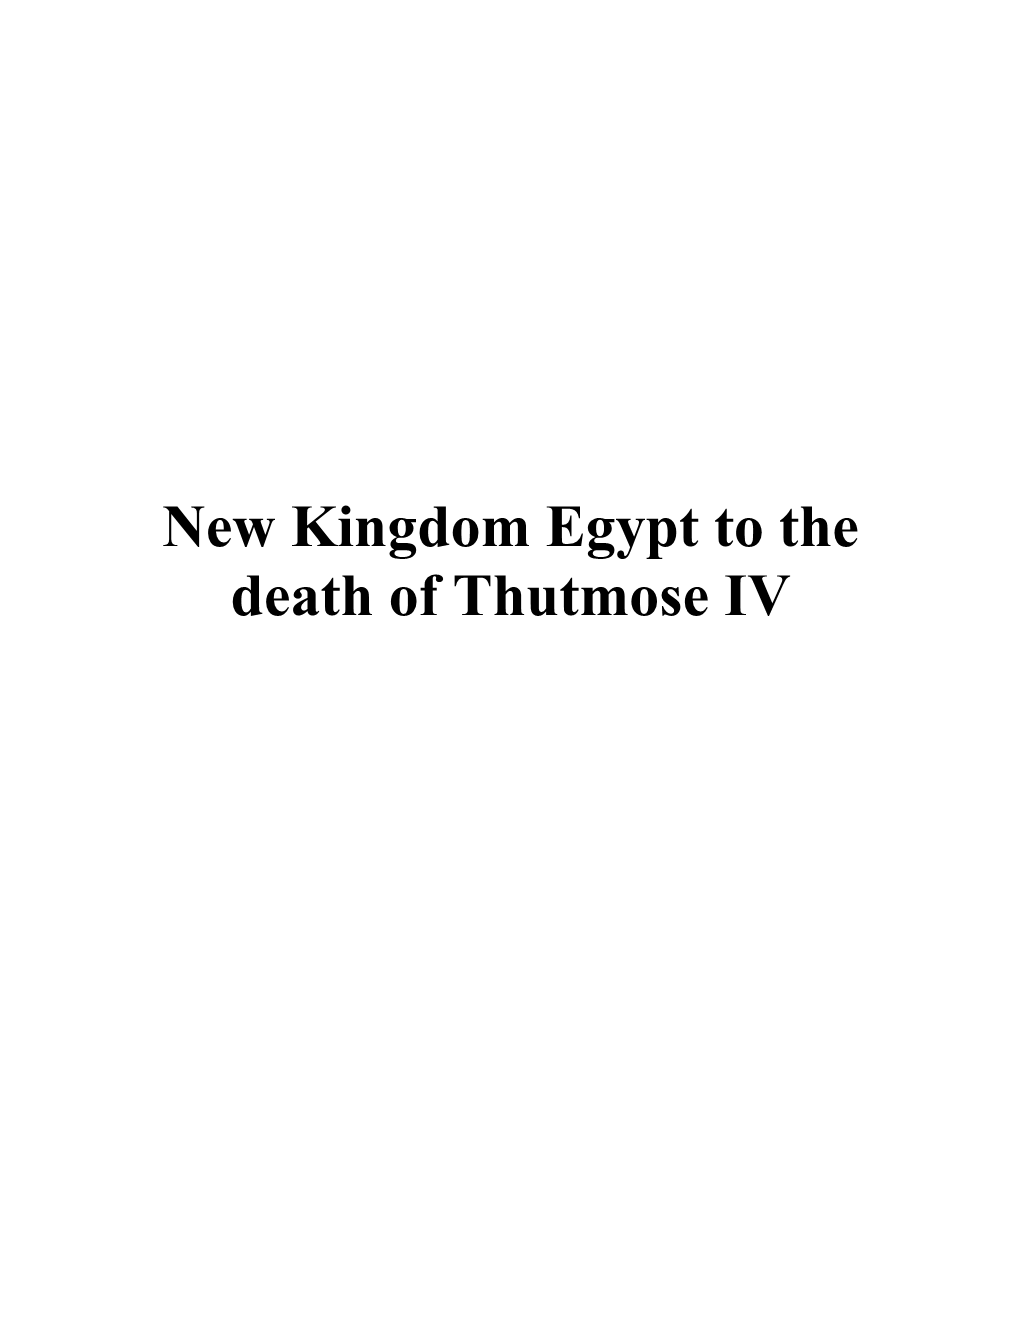 New Kingdom Egypt to the Death of Thutmose IV